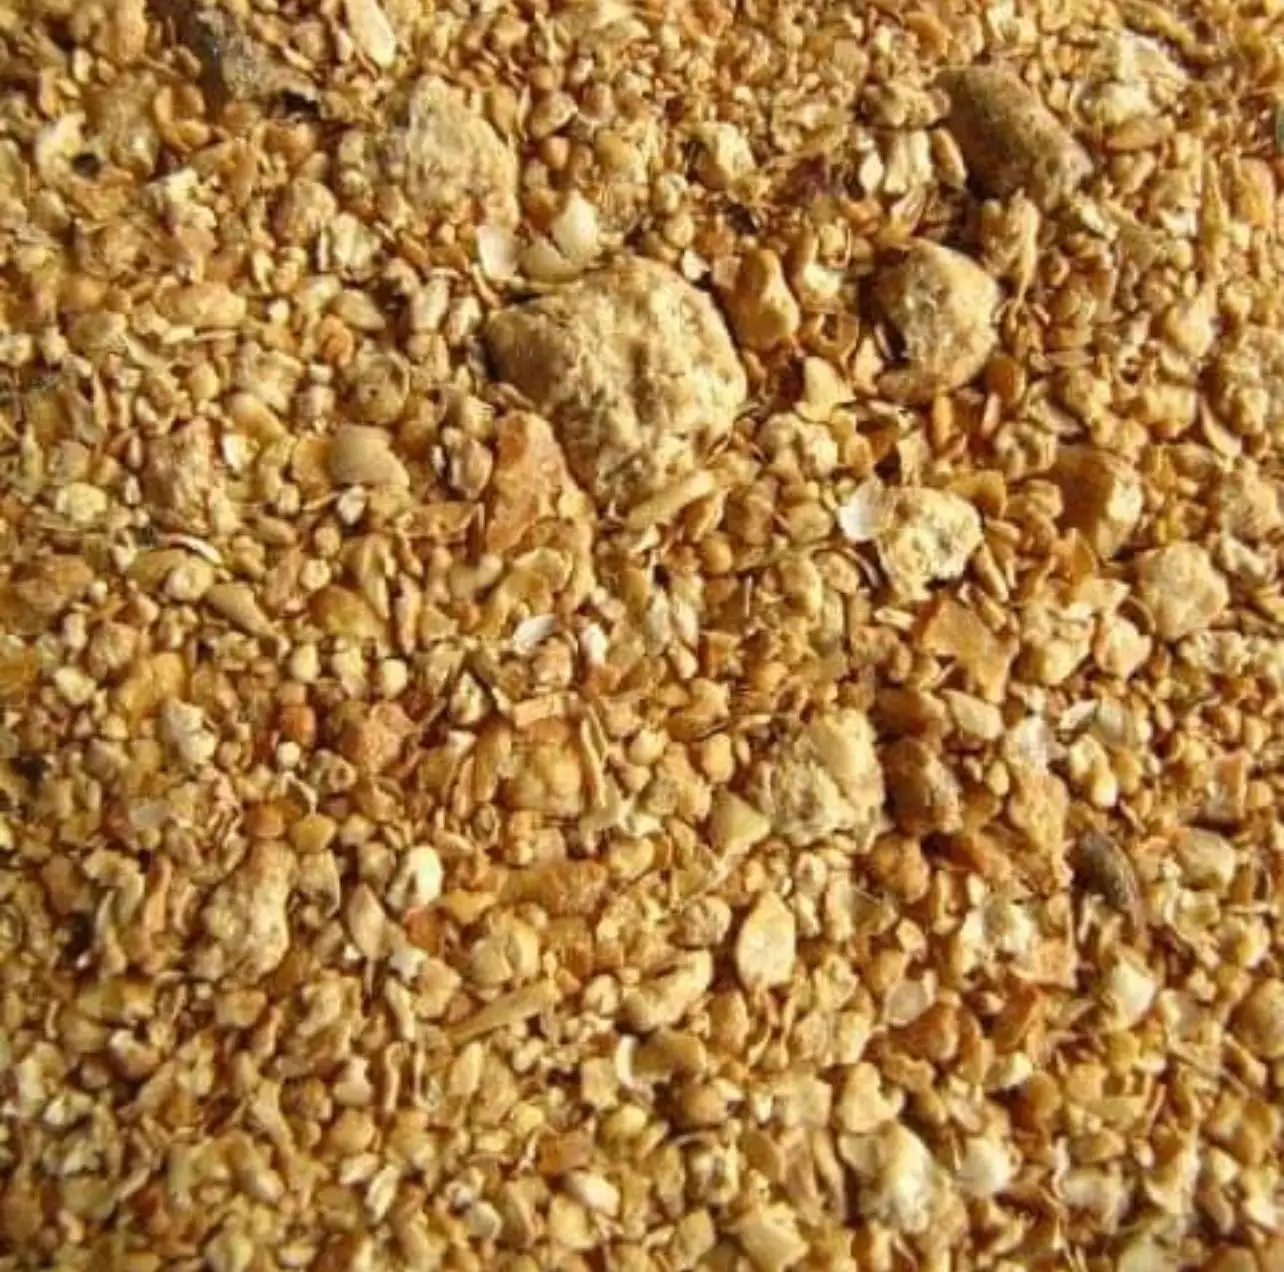 Protein Quality Soybean Meal / Soya Bean Meal for Animal Feed High Protein Quality Soybean Meal / Soya Bean Meal for Animal